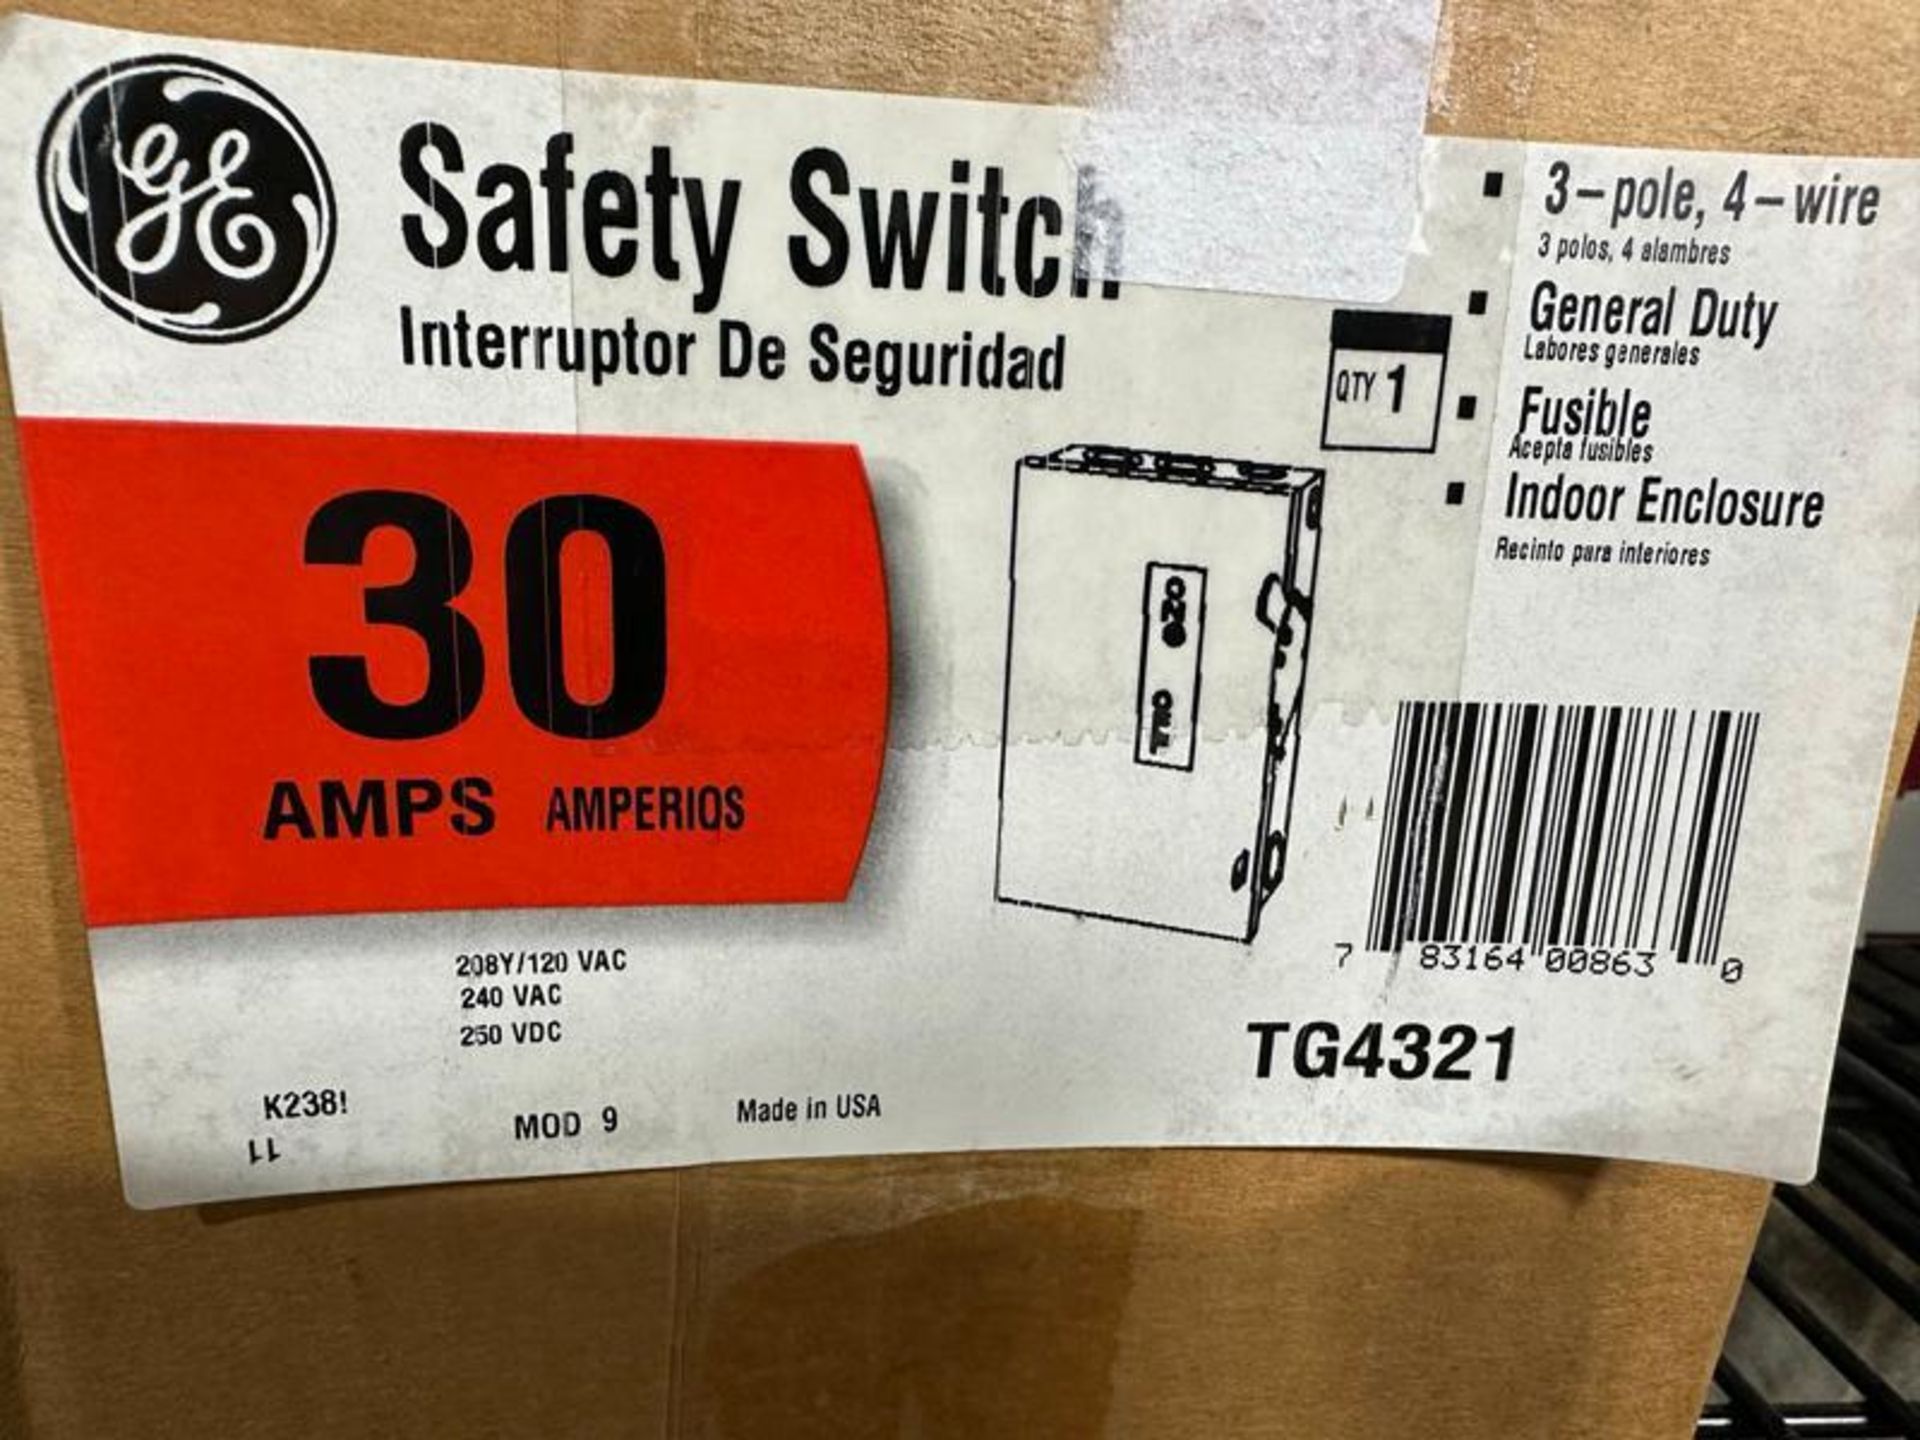 General Electric TG4321 Enclosed Safety Switch 30A 240VAC/250VDC - Image 2 of 3